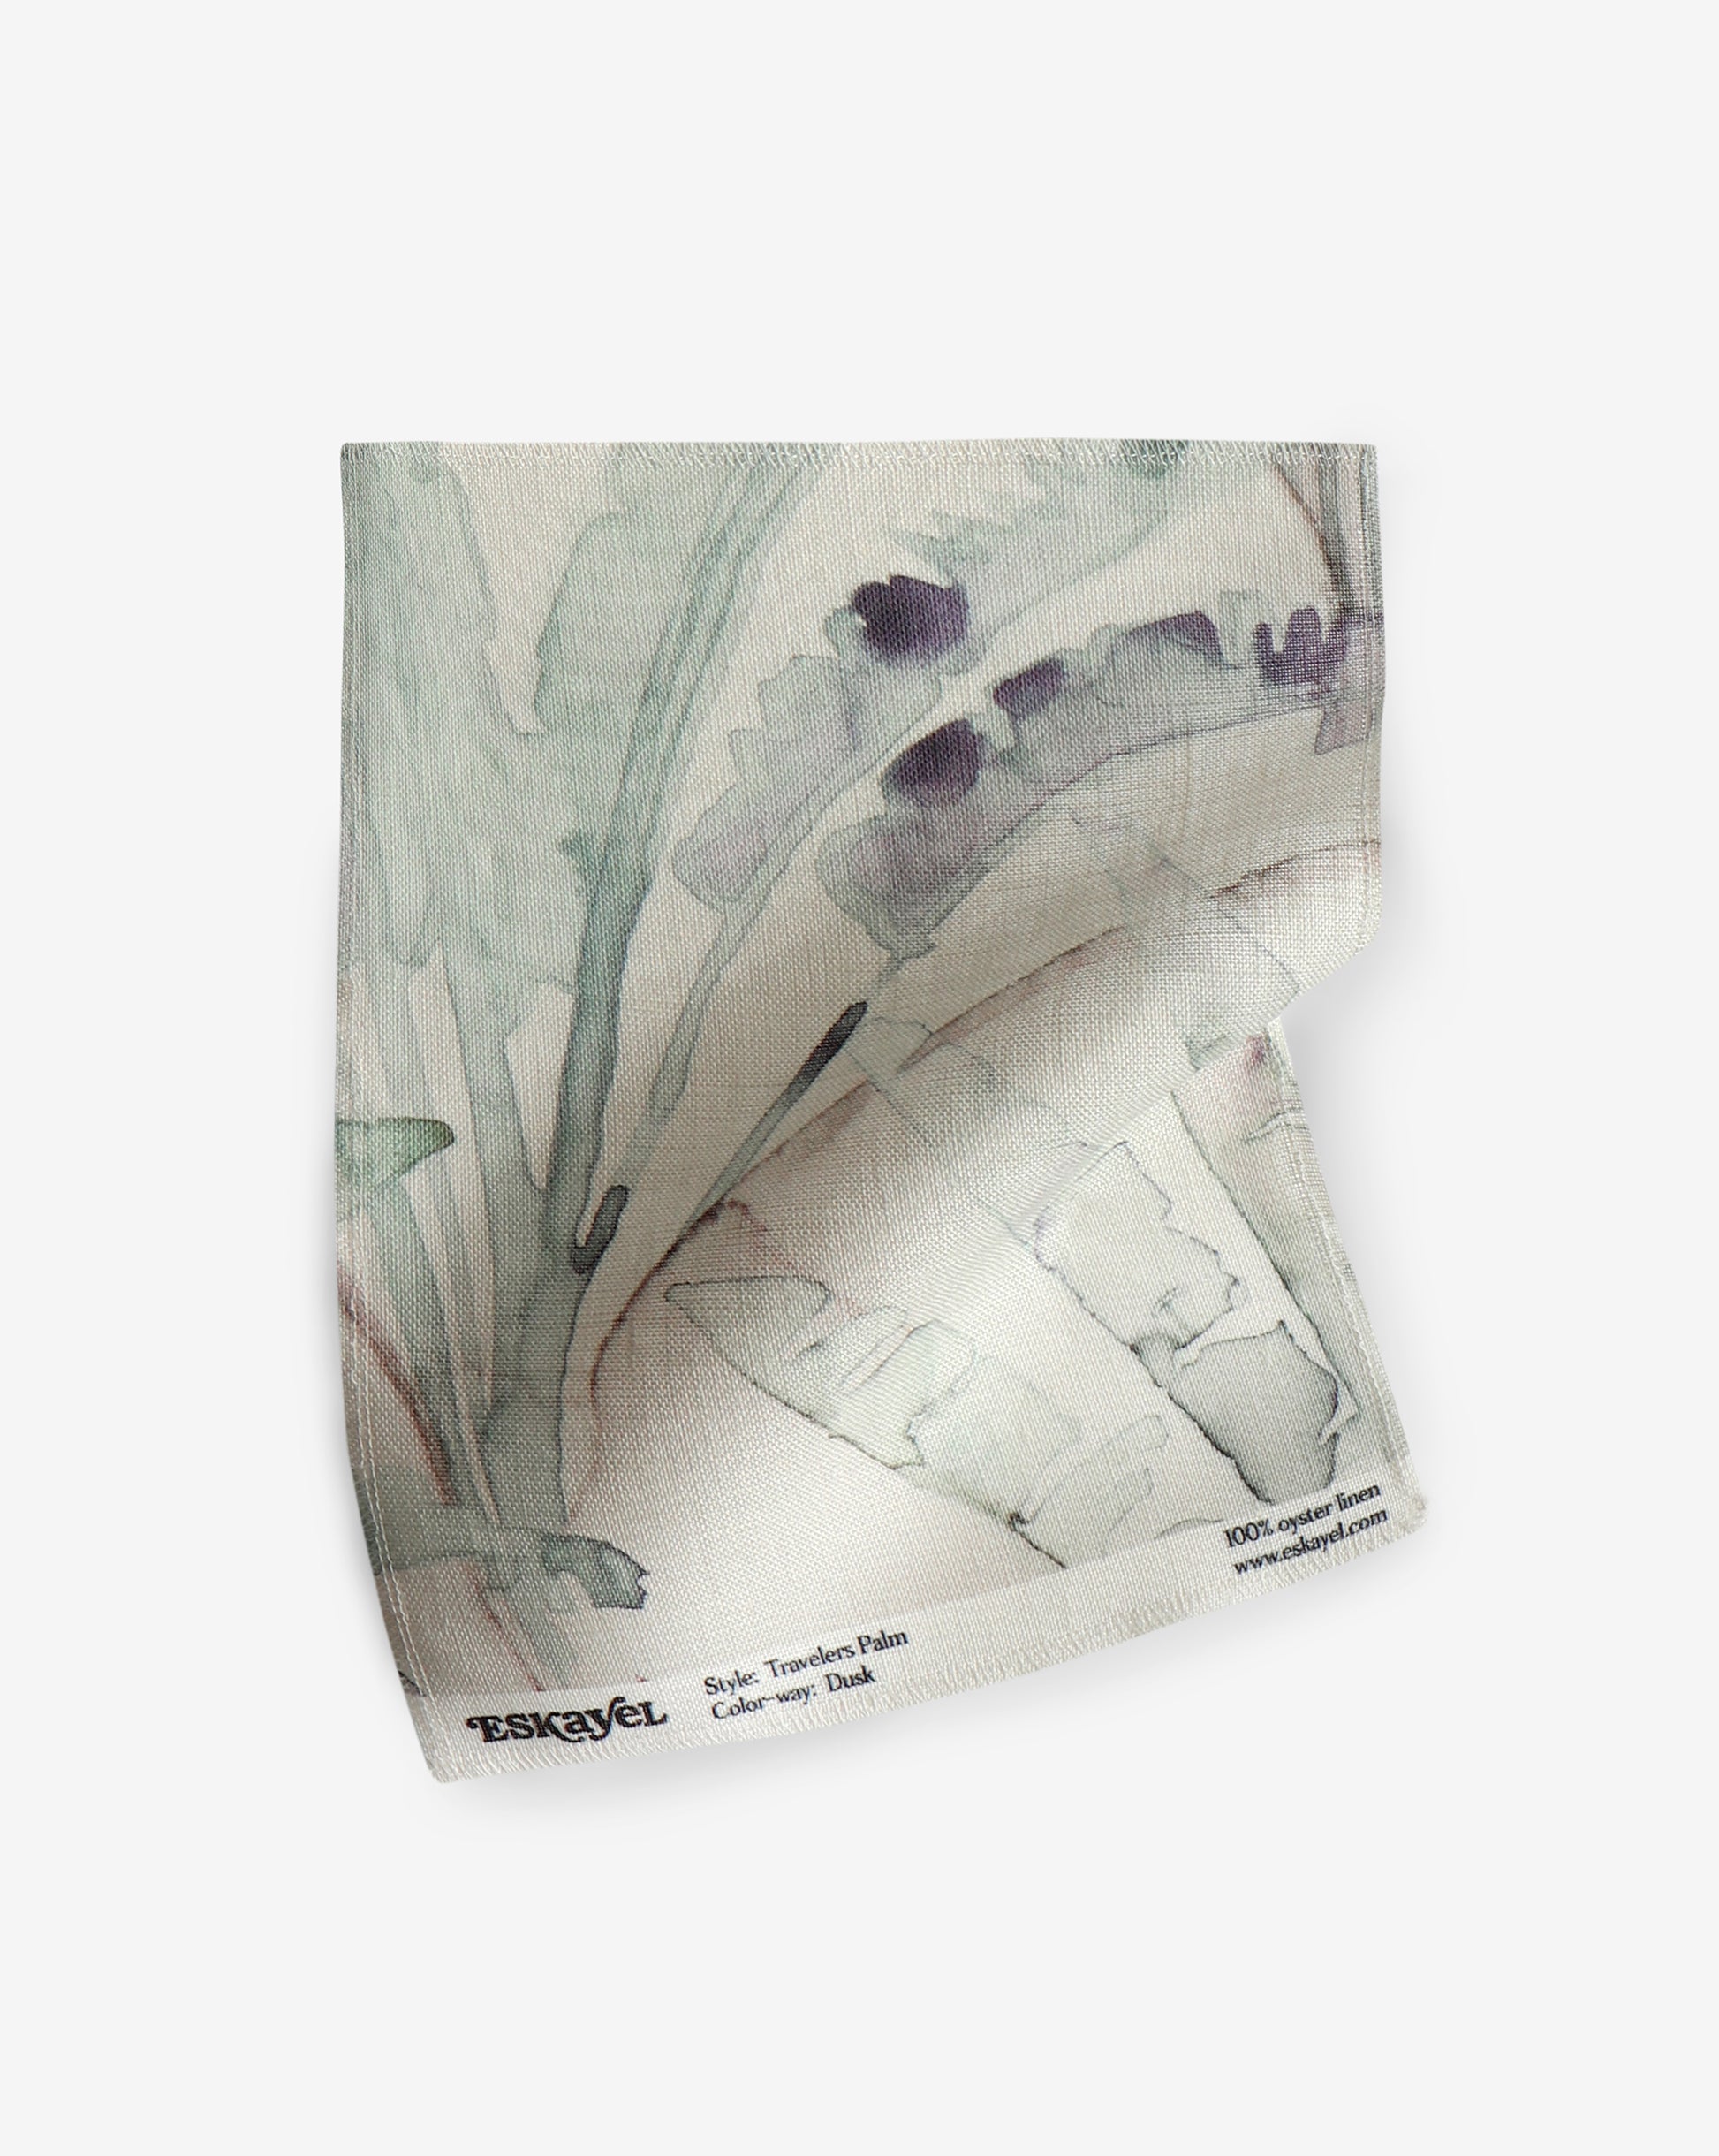 An image of a Travelers Palm Fabric Dusk painting on a piece of fabric, showcasing the delicate strokes and vibrant colors inspired by Travelers Palm